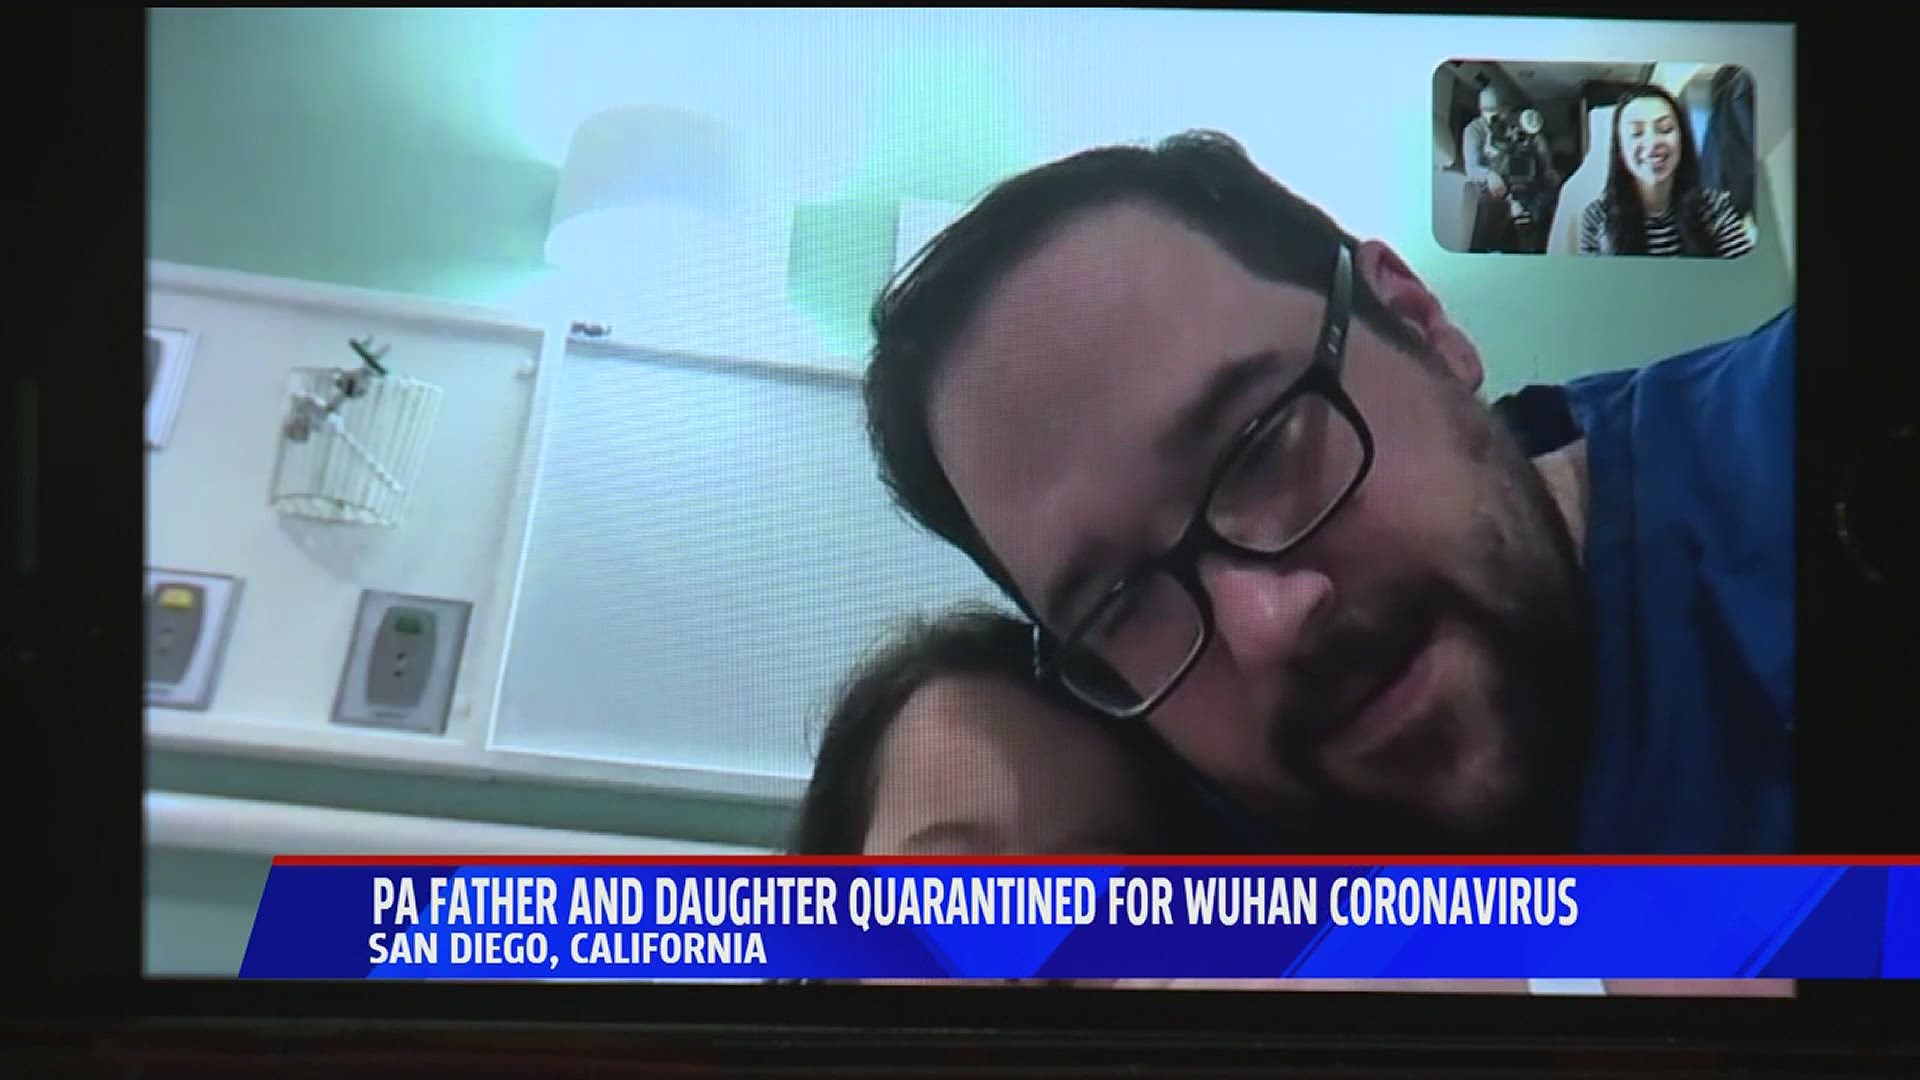 A Pennsylvania father and his daughter are under quarantine in San Diego California for the Coronavirus, after returning home from a trip to China.